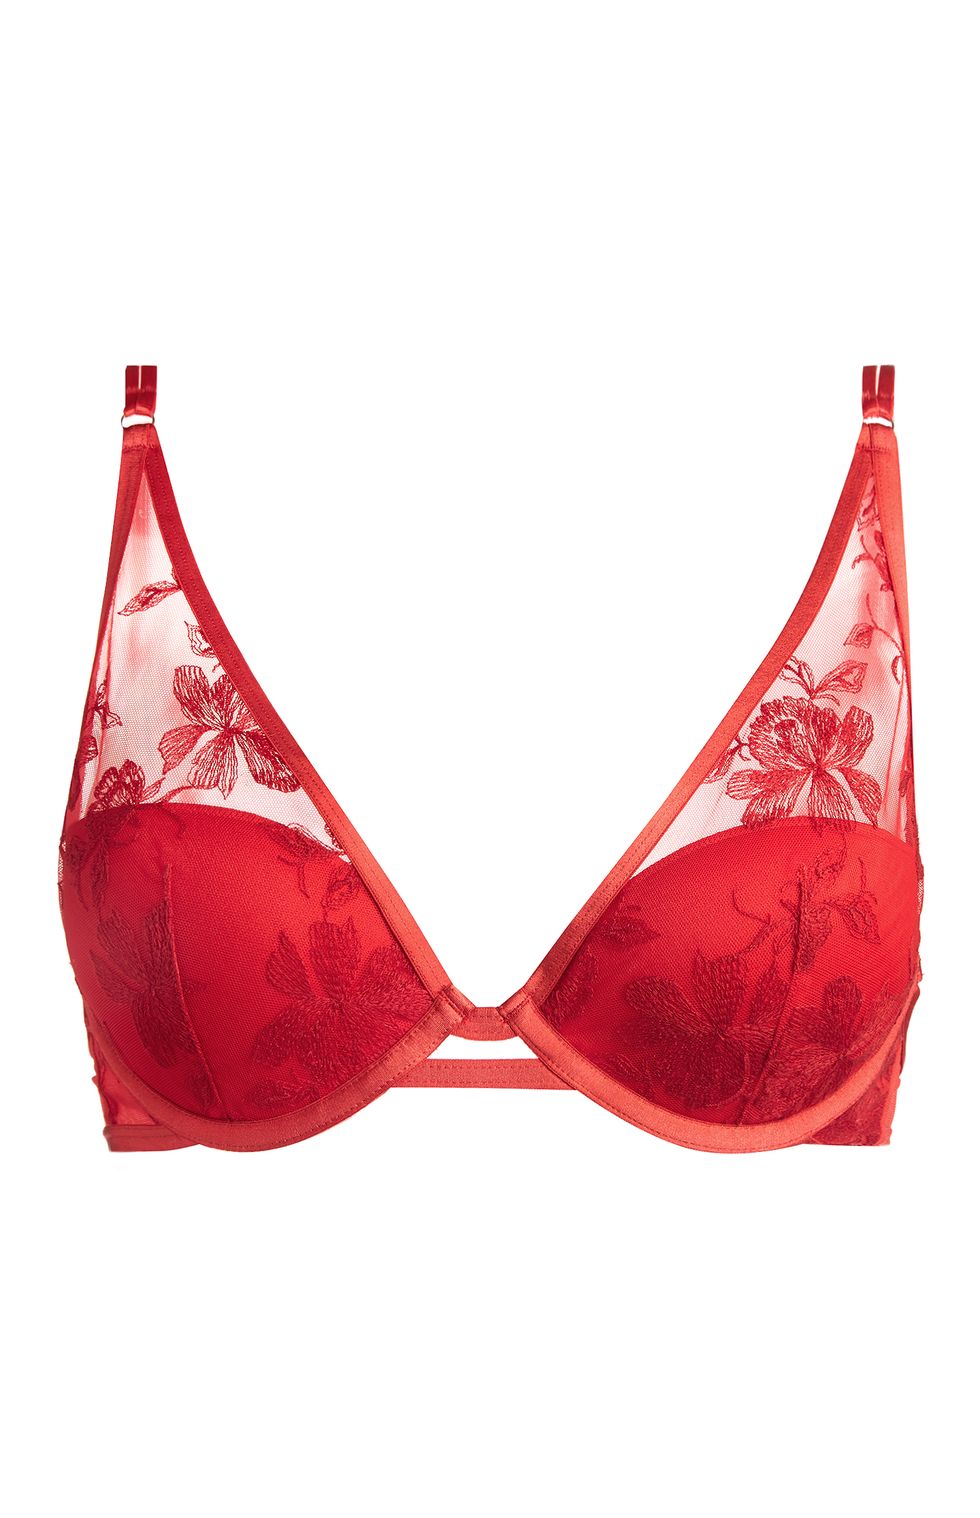 Primark is upping their lingerie game for Valentine’s Day